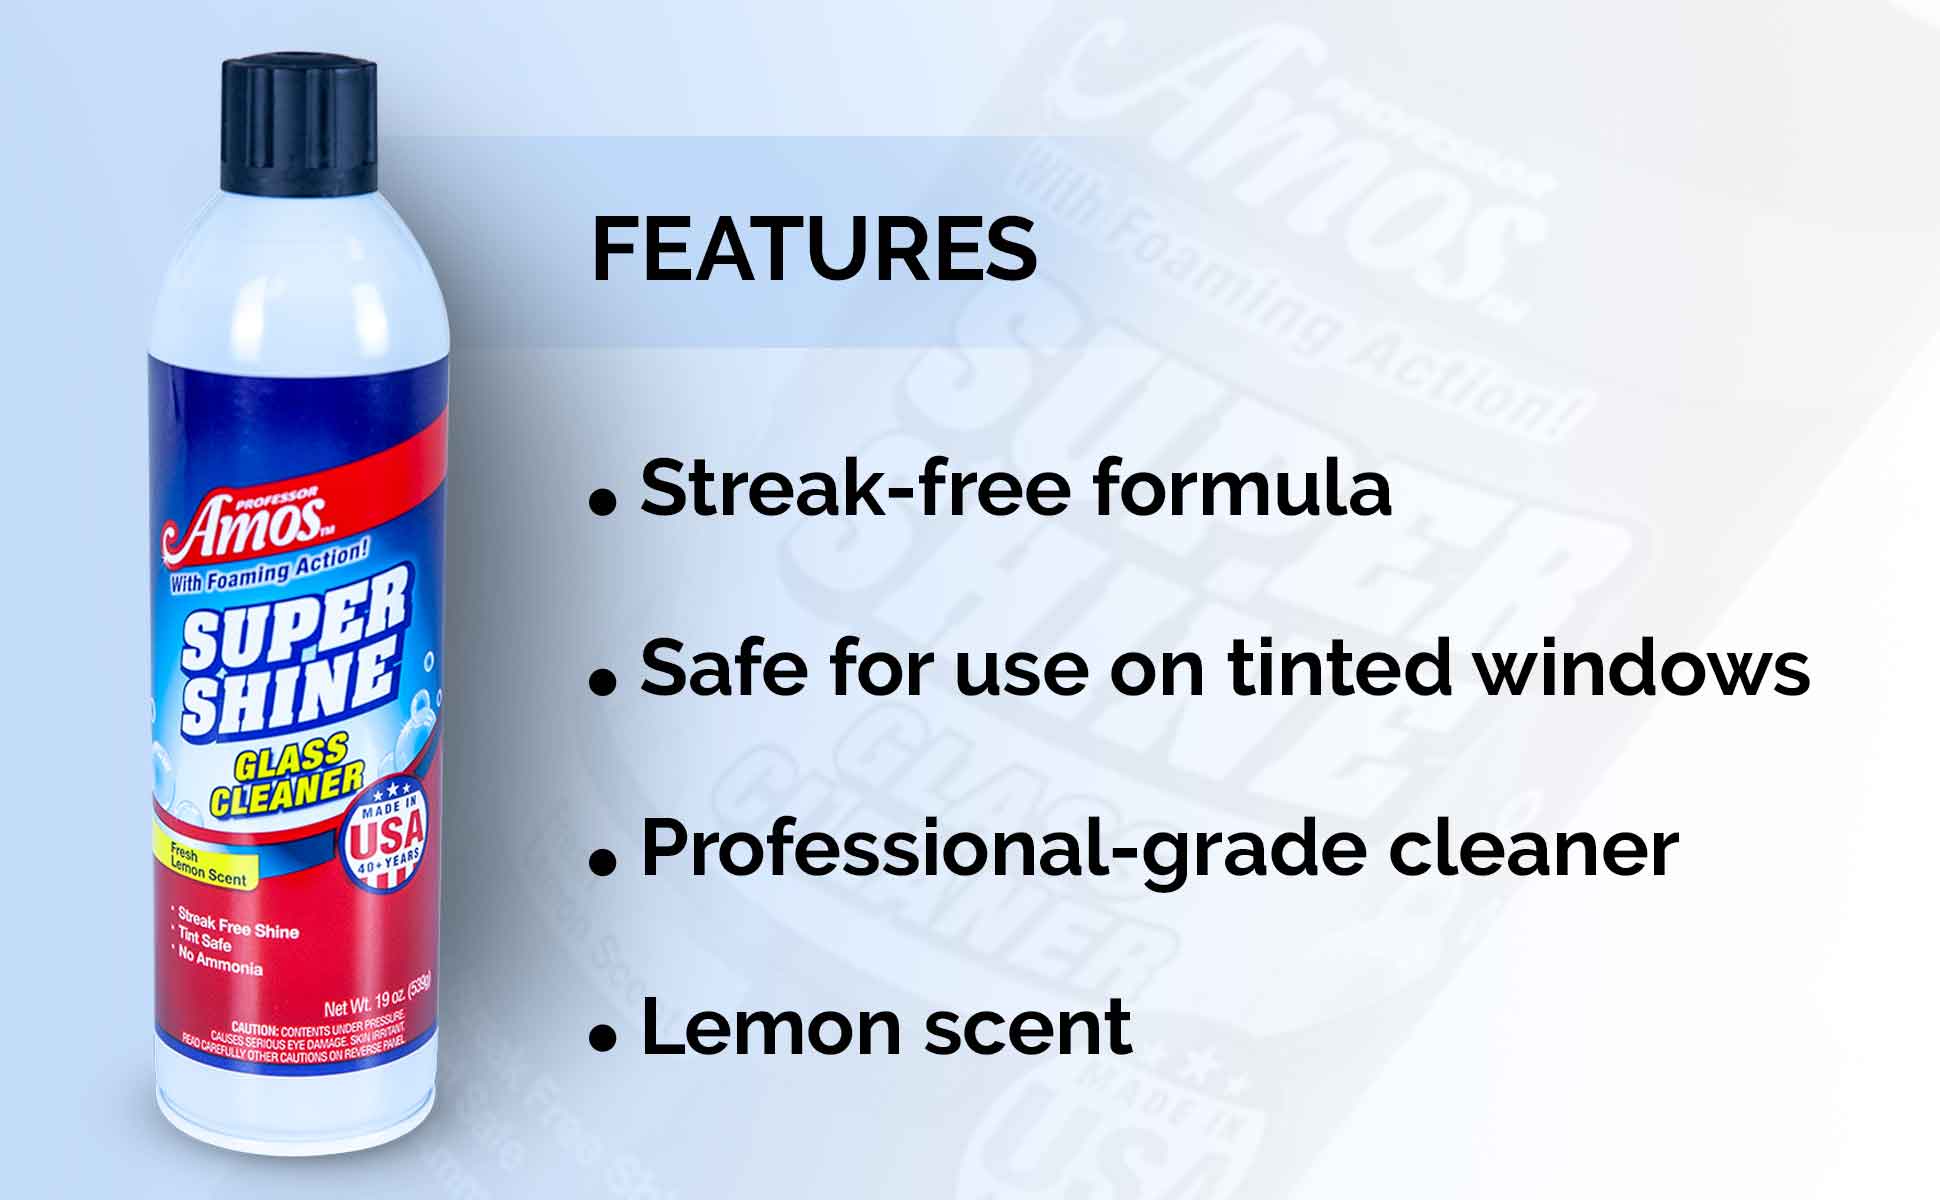 Performax Glass Cleaner (19oz)